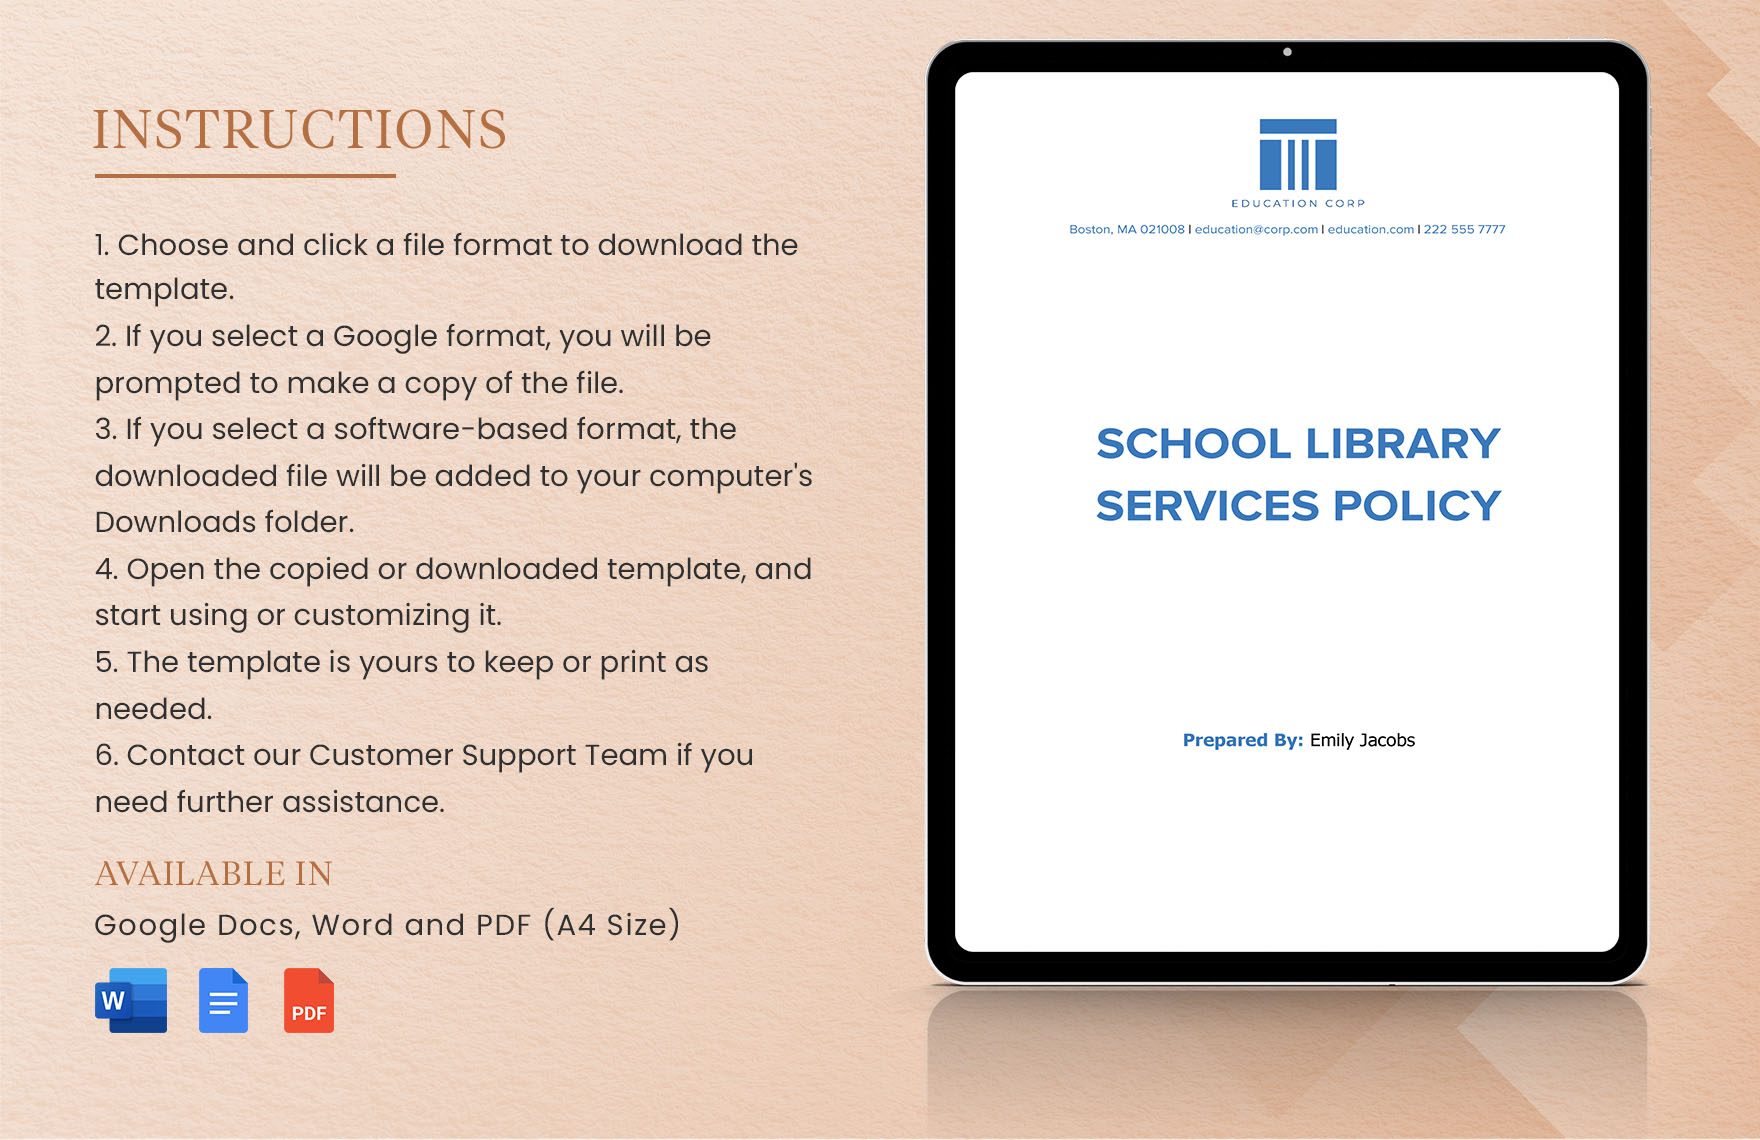 School Library Services Policy Template